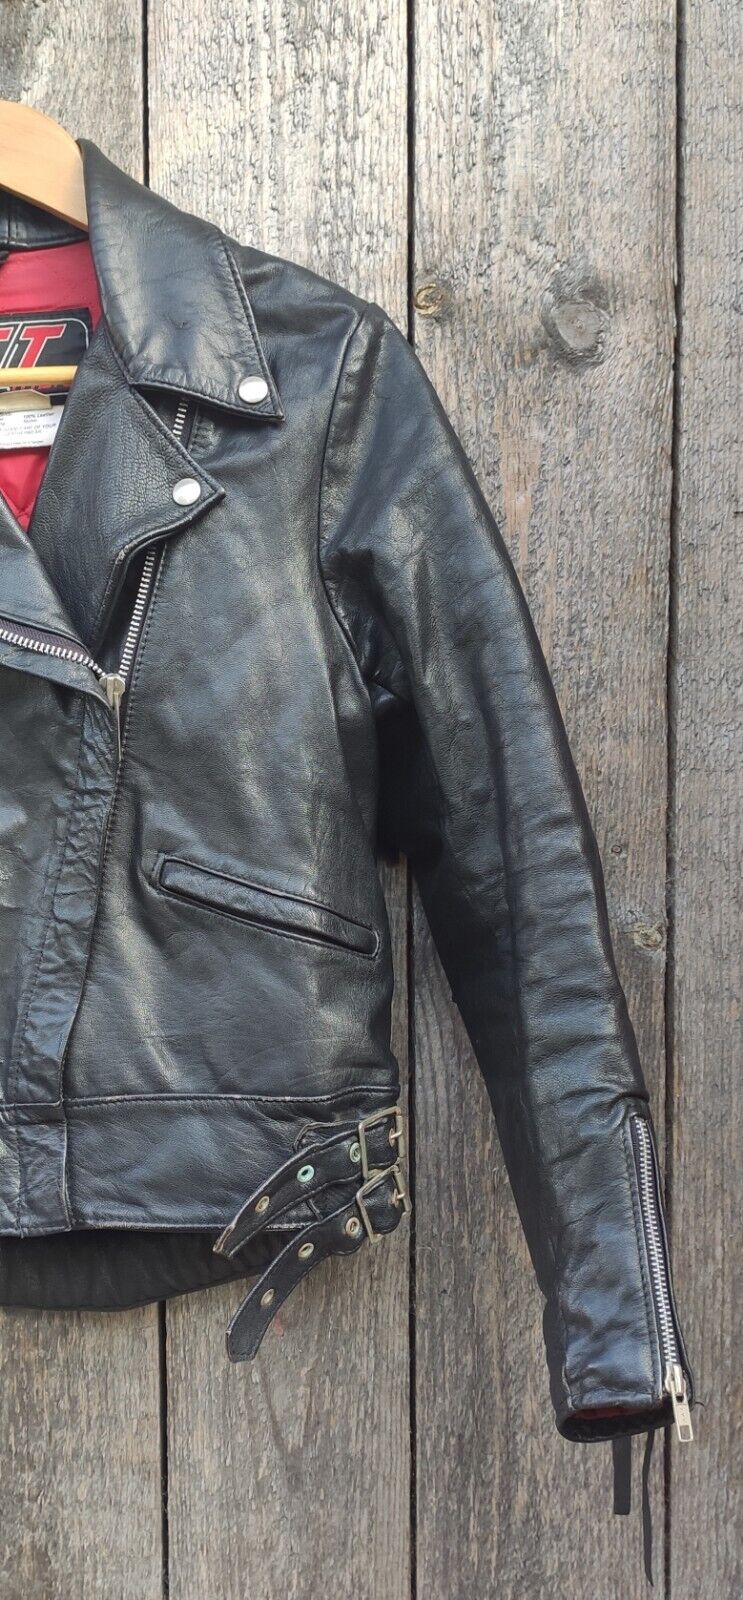 Rogue Originals — Vintage TT Leathers Motorcycle Jacket With